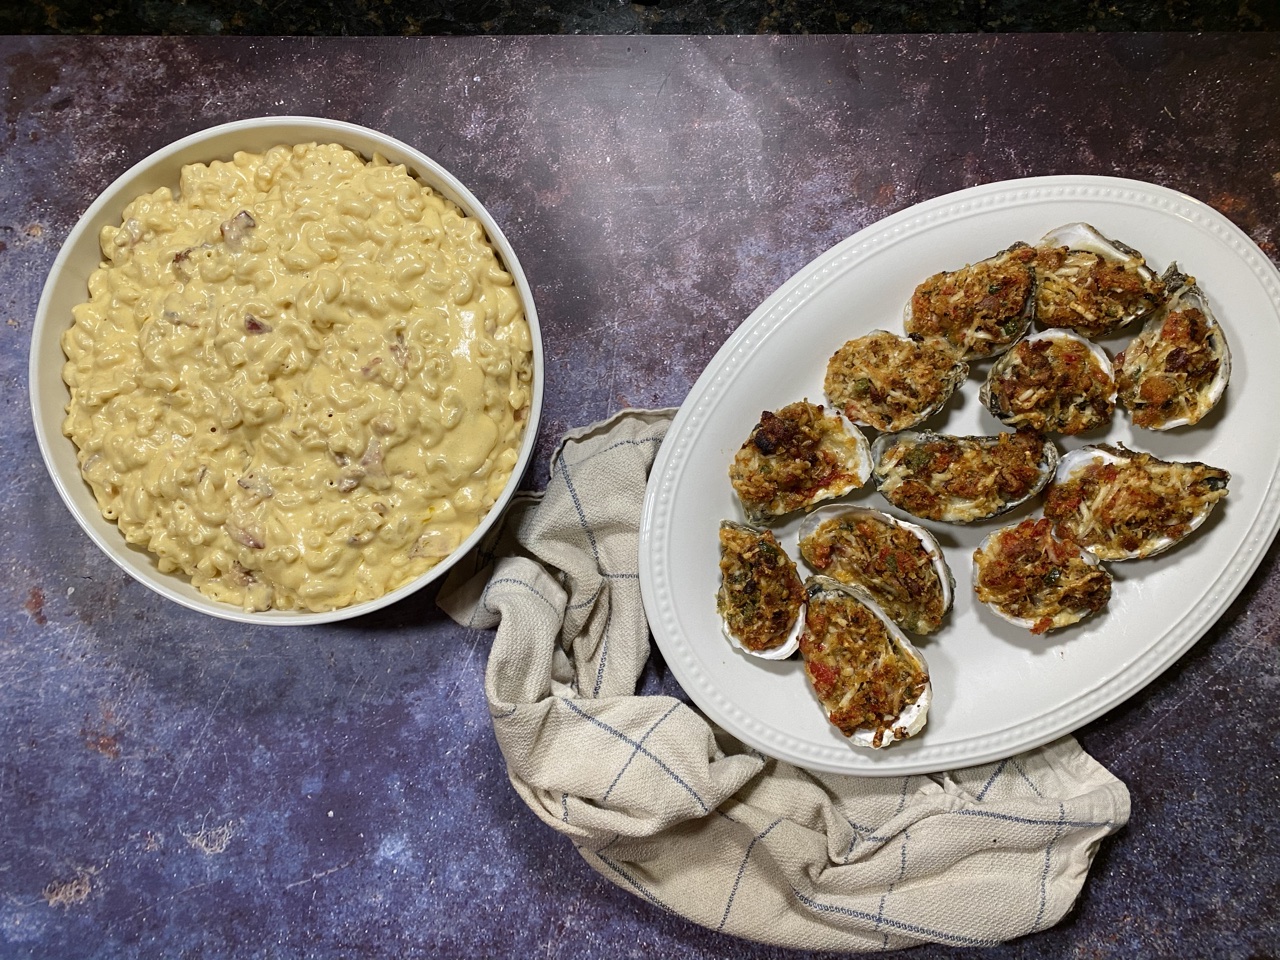 25986BF7 E02A 455B 8940 7B7EDB9375A7 - Sorry Charlie’s Copycat Casino Baked Oysters with Savory Macaroni & Cheese